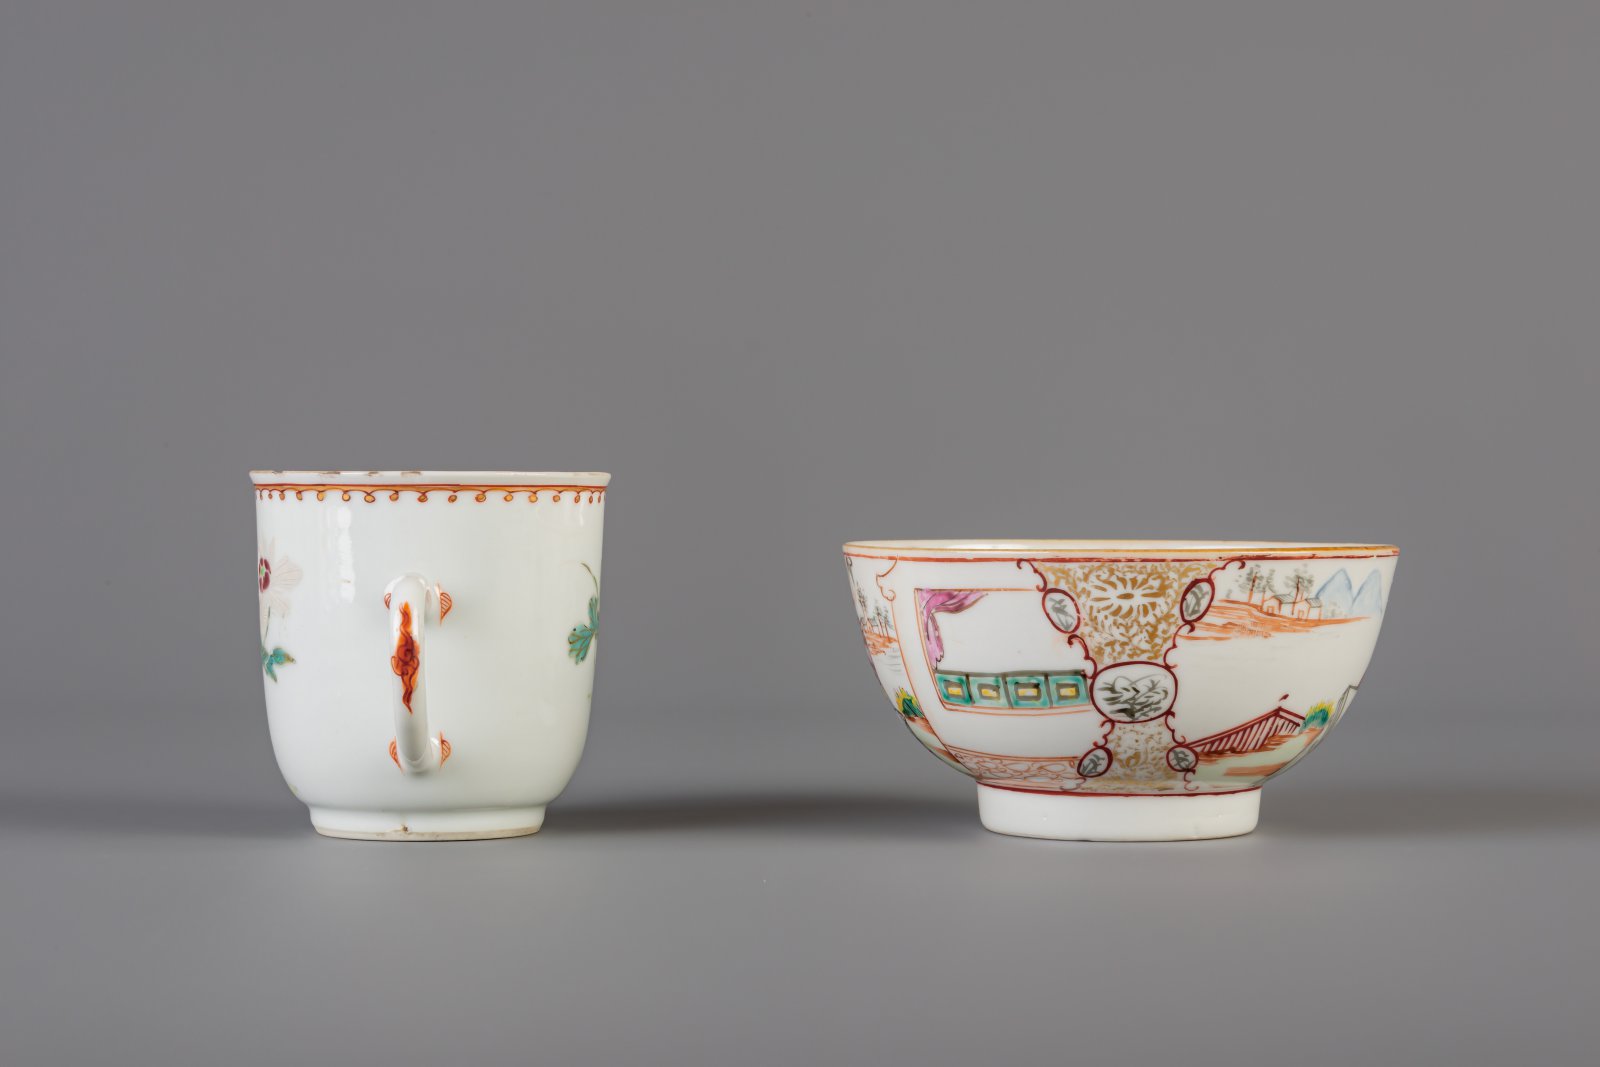 A varied collection of Chinese porcelain, 18th/19th C. - Image 11 of 13